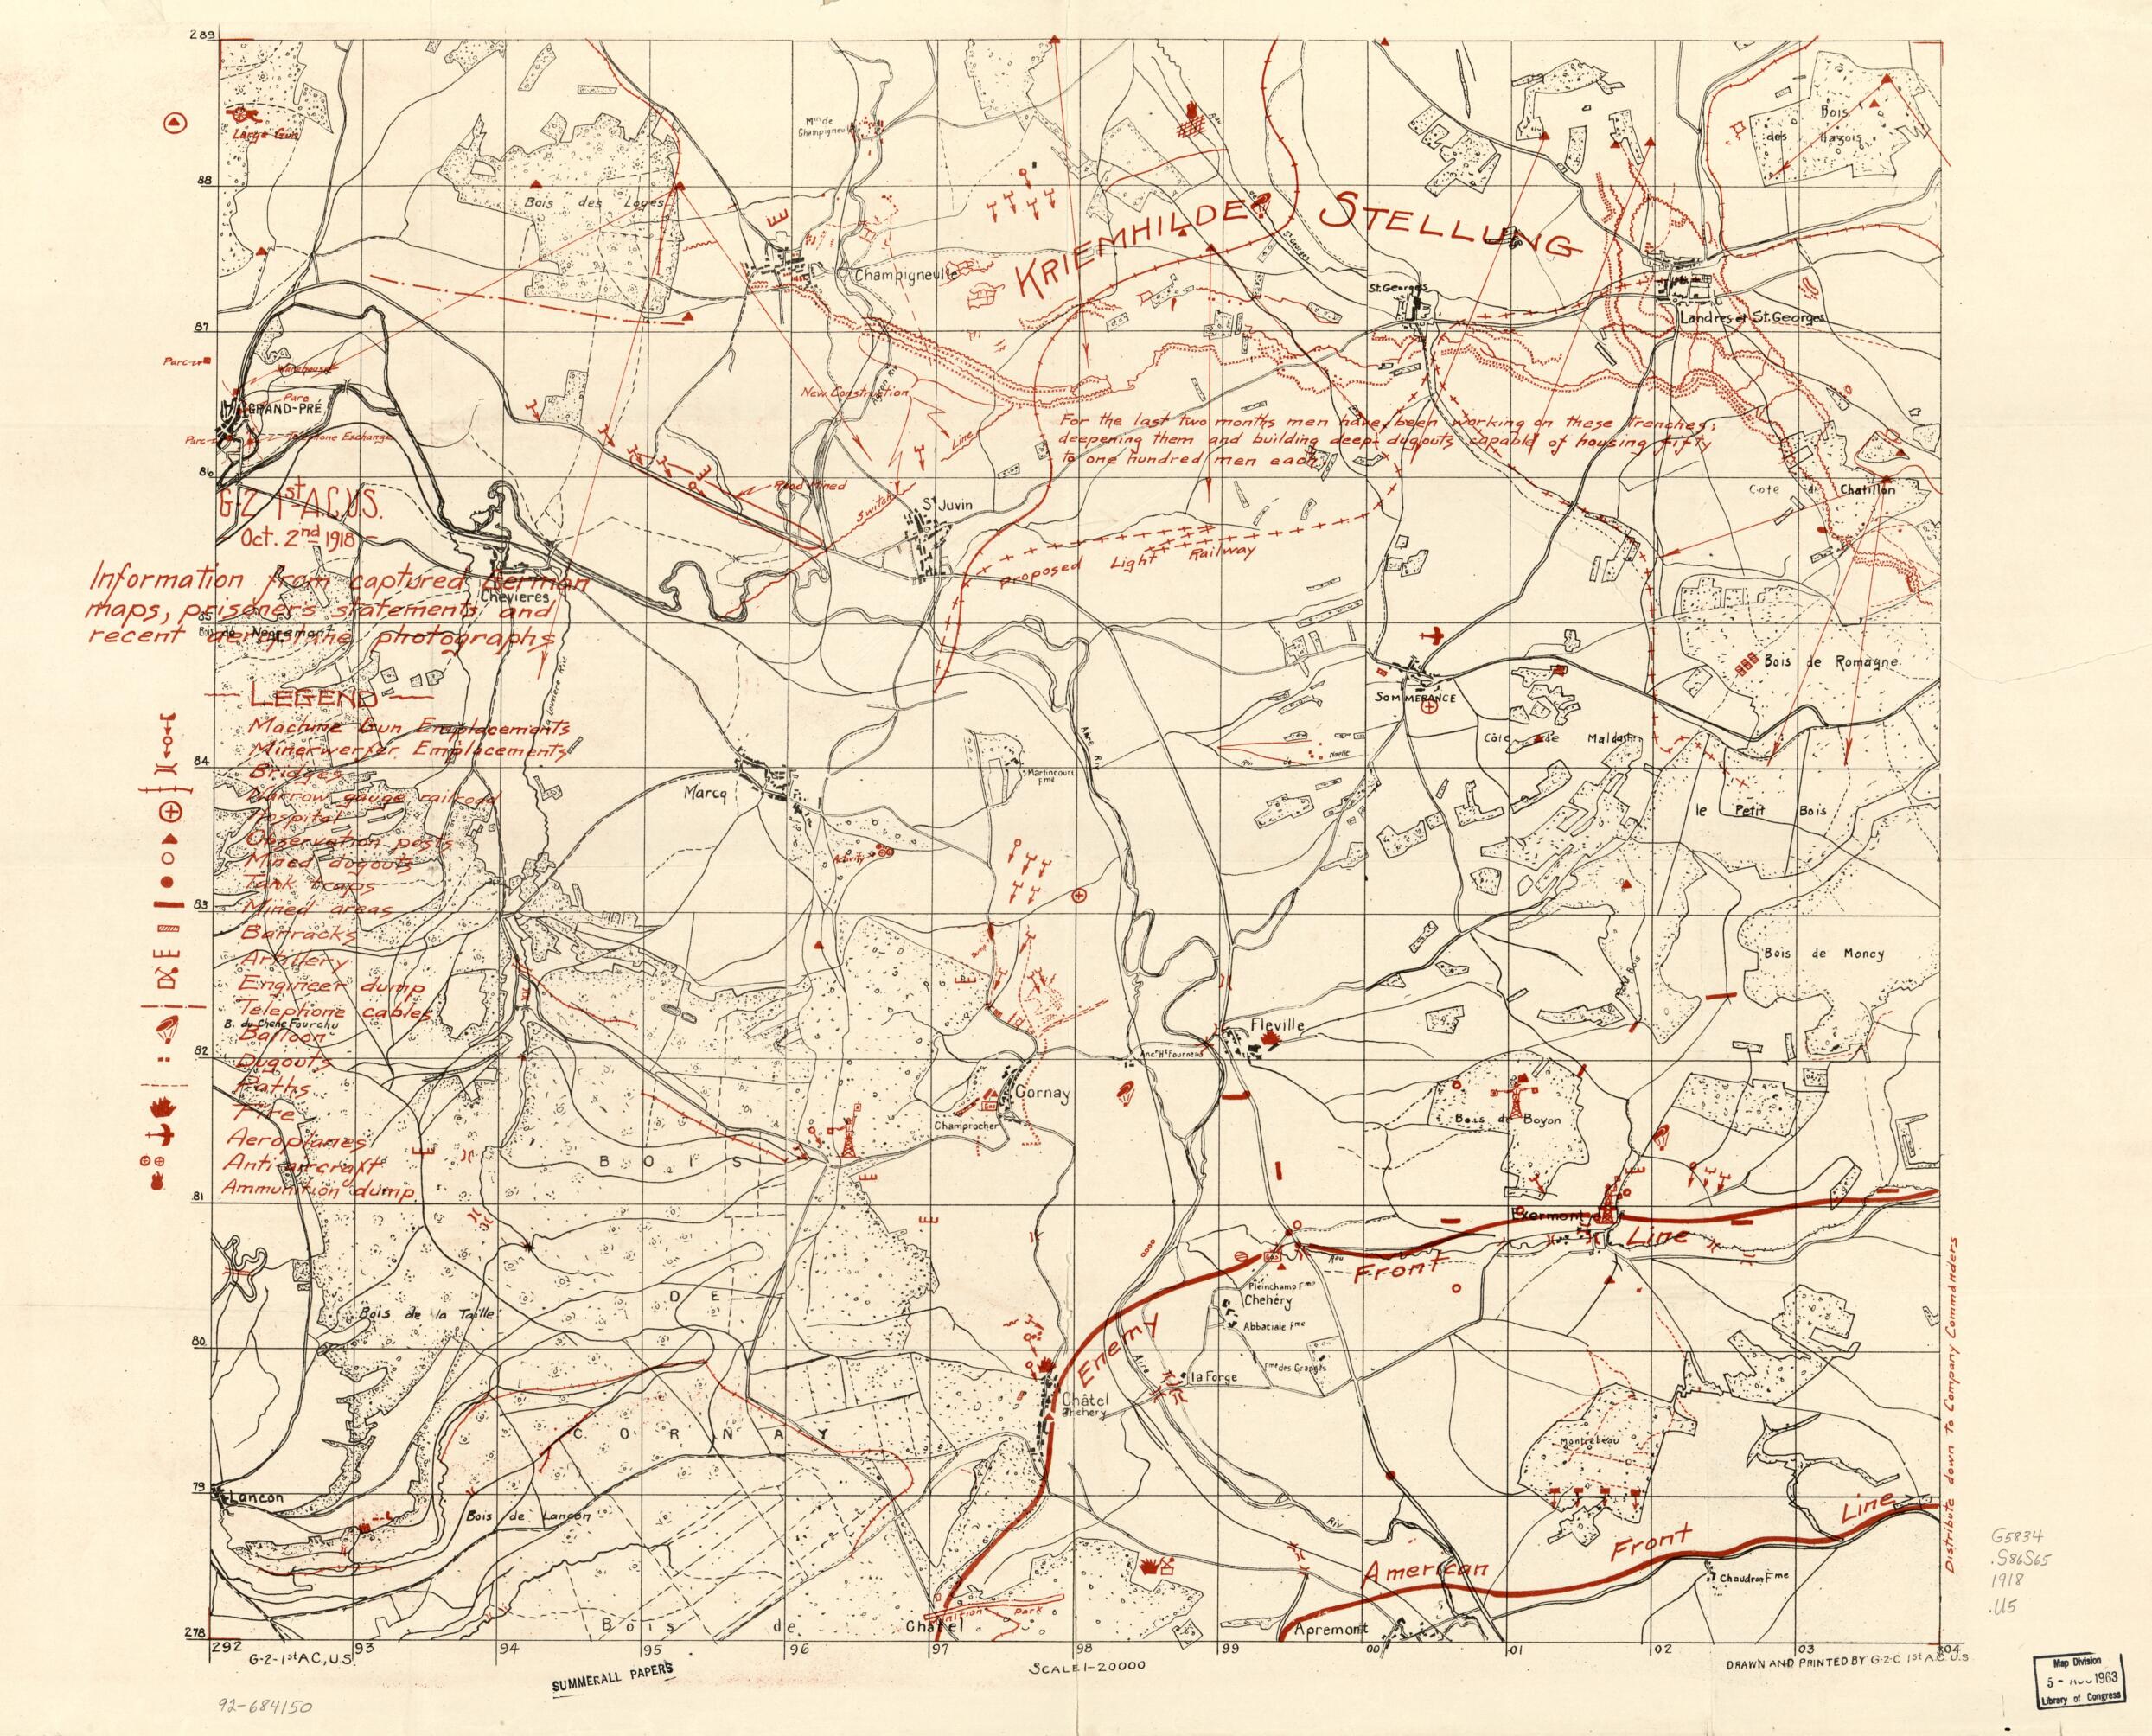 This old map of Information from Captured German Maps, Prisoner&